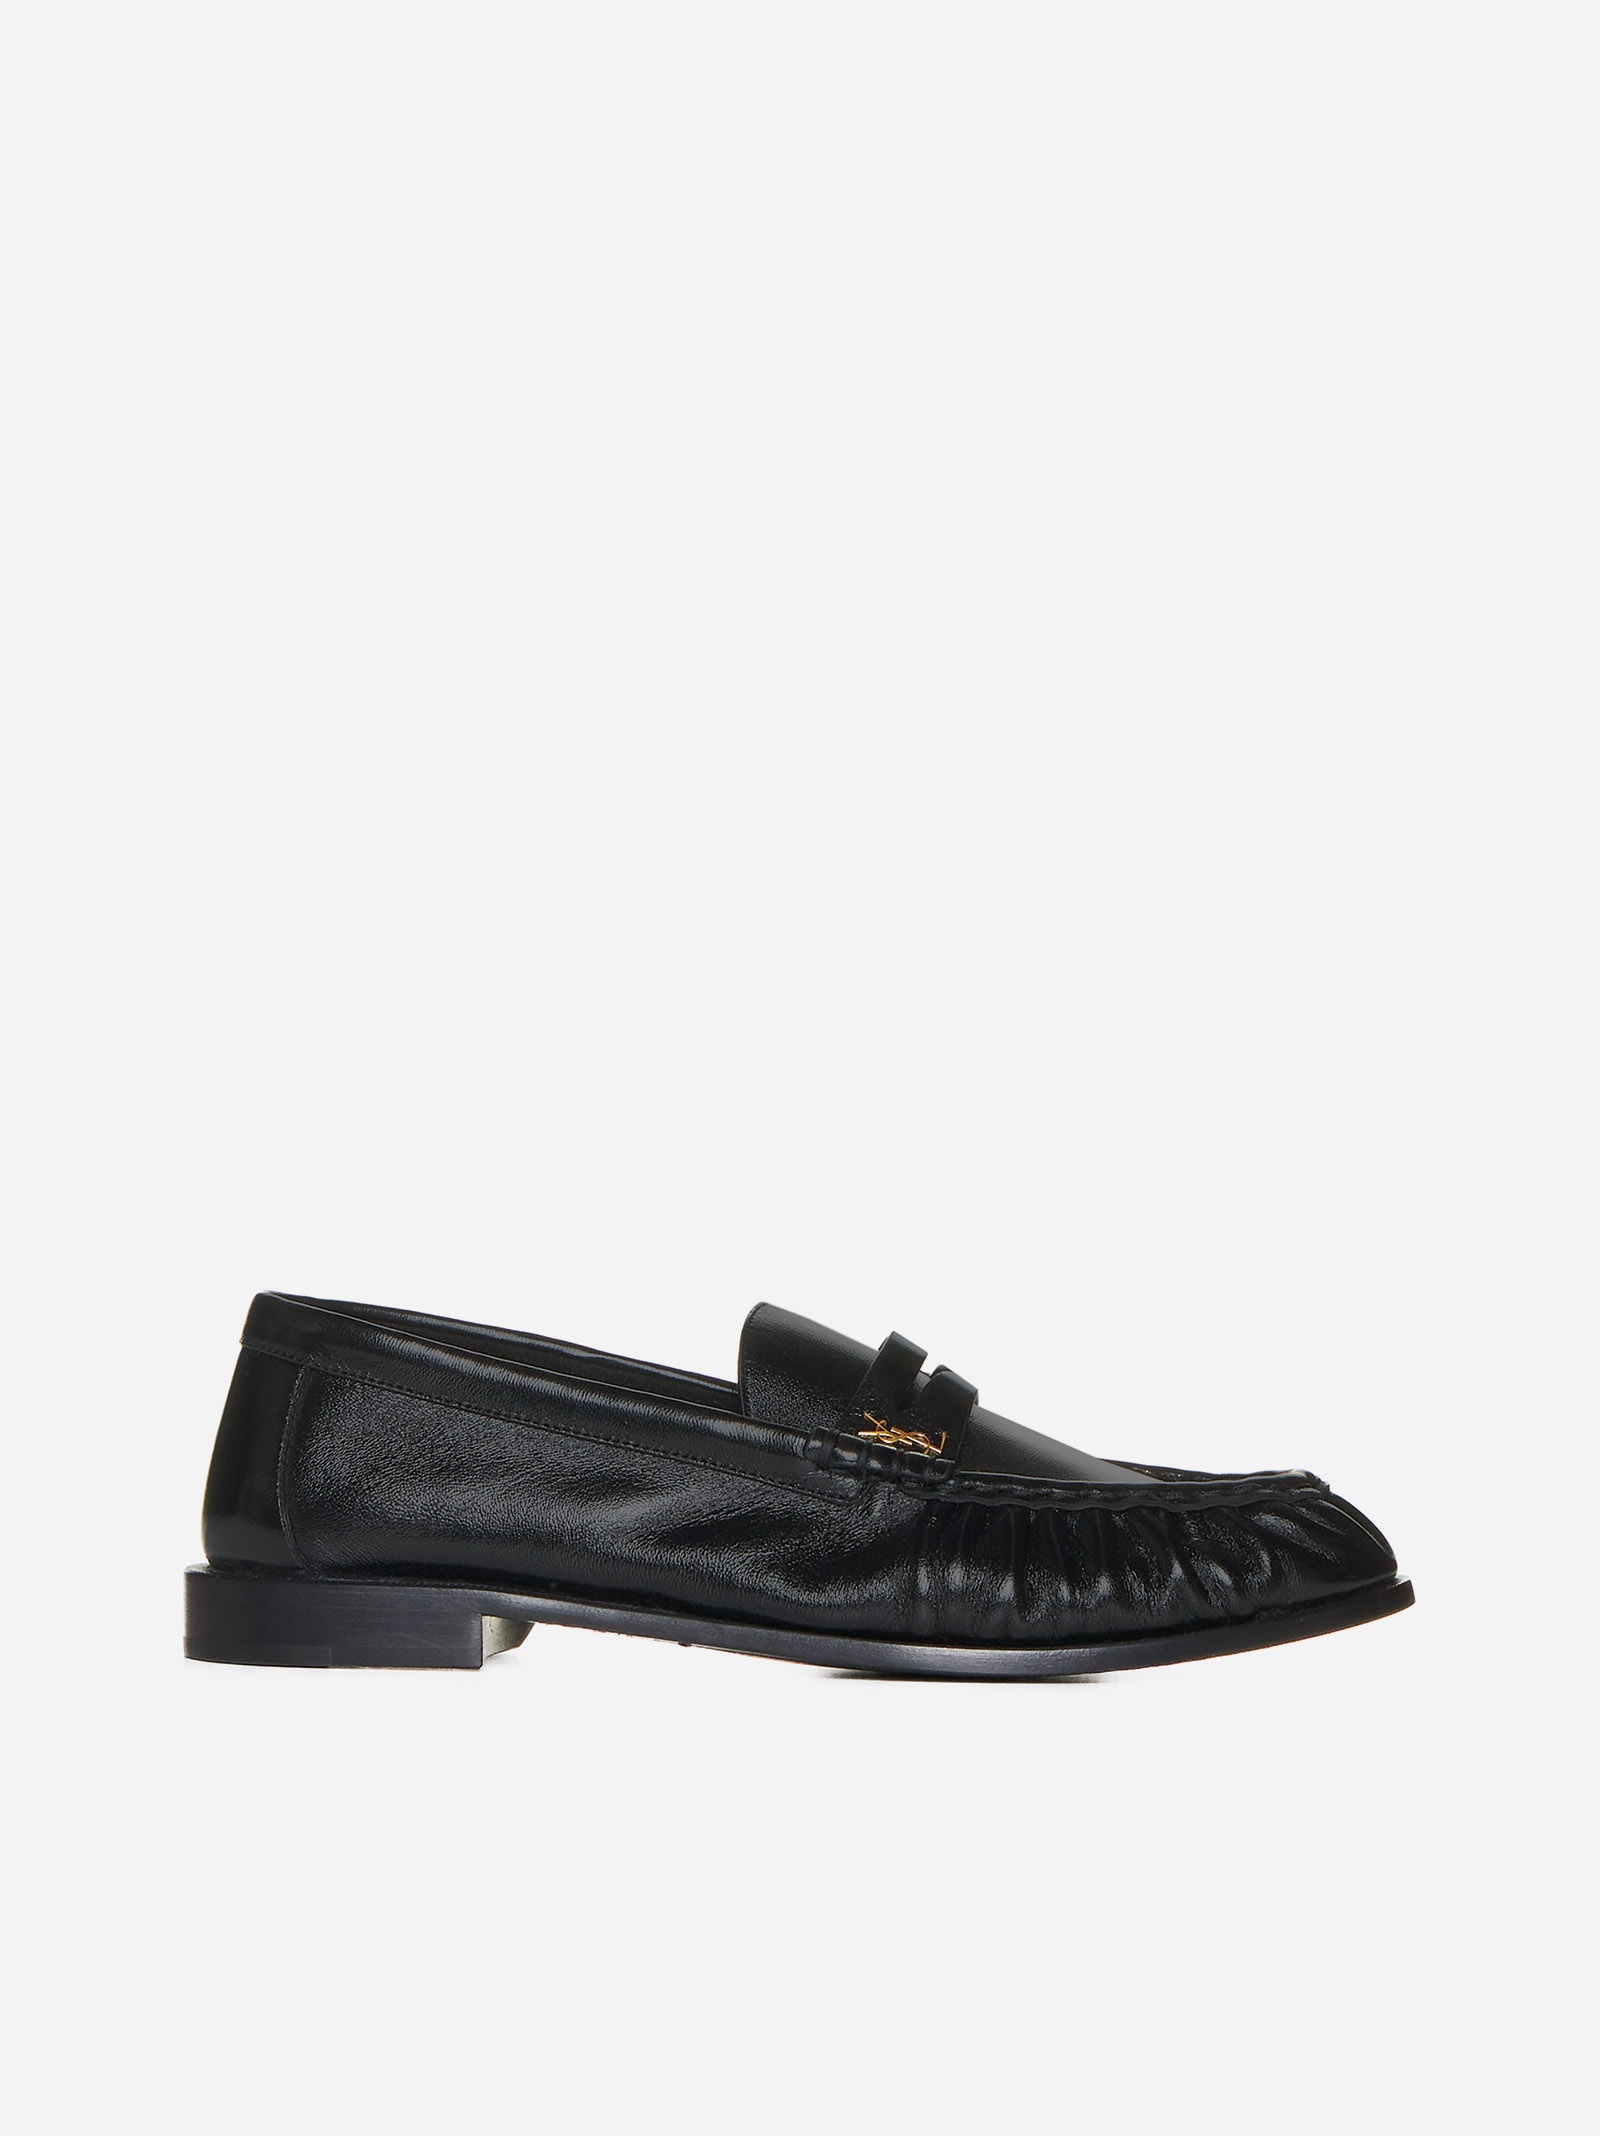 YSL logo leather loafers - 1